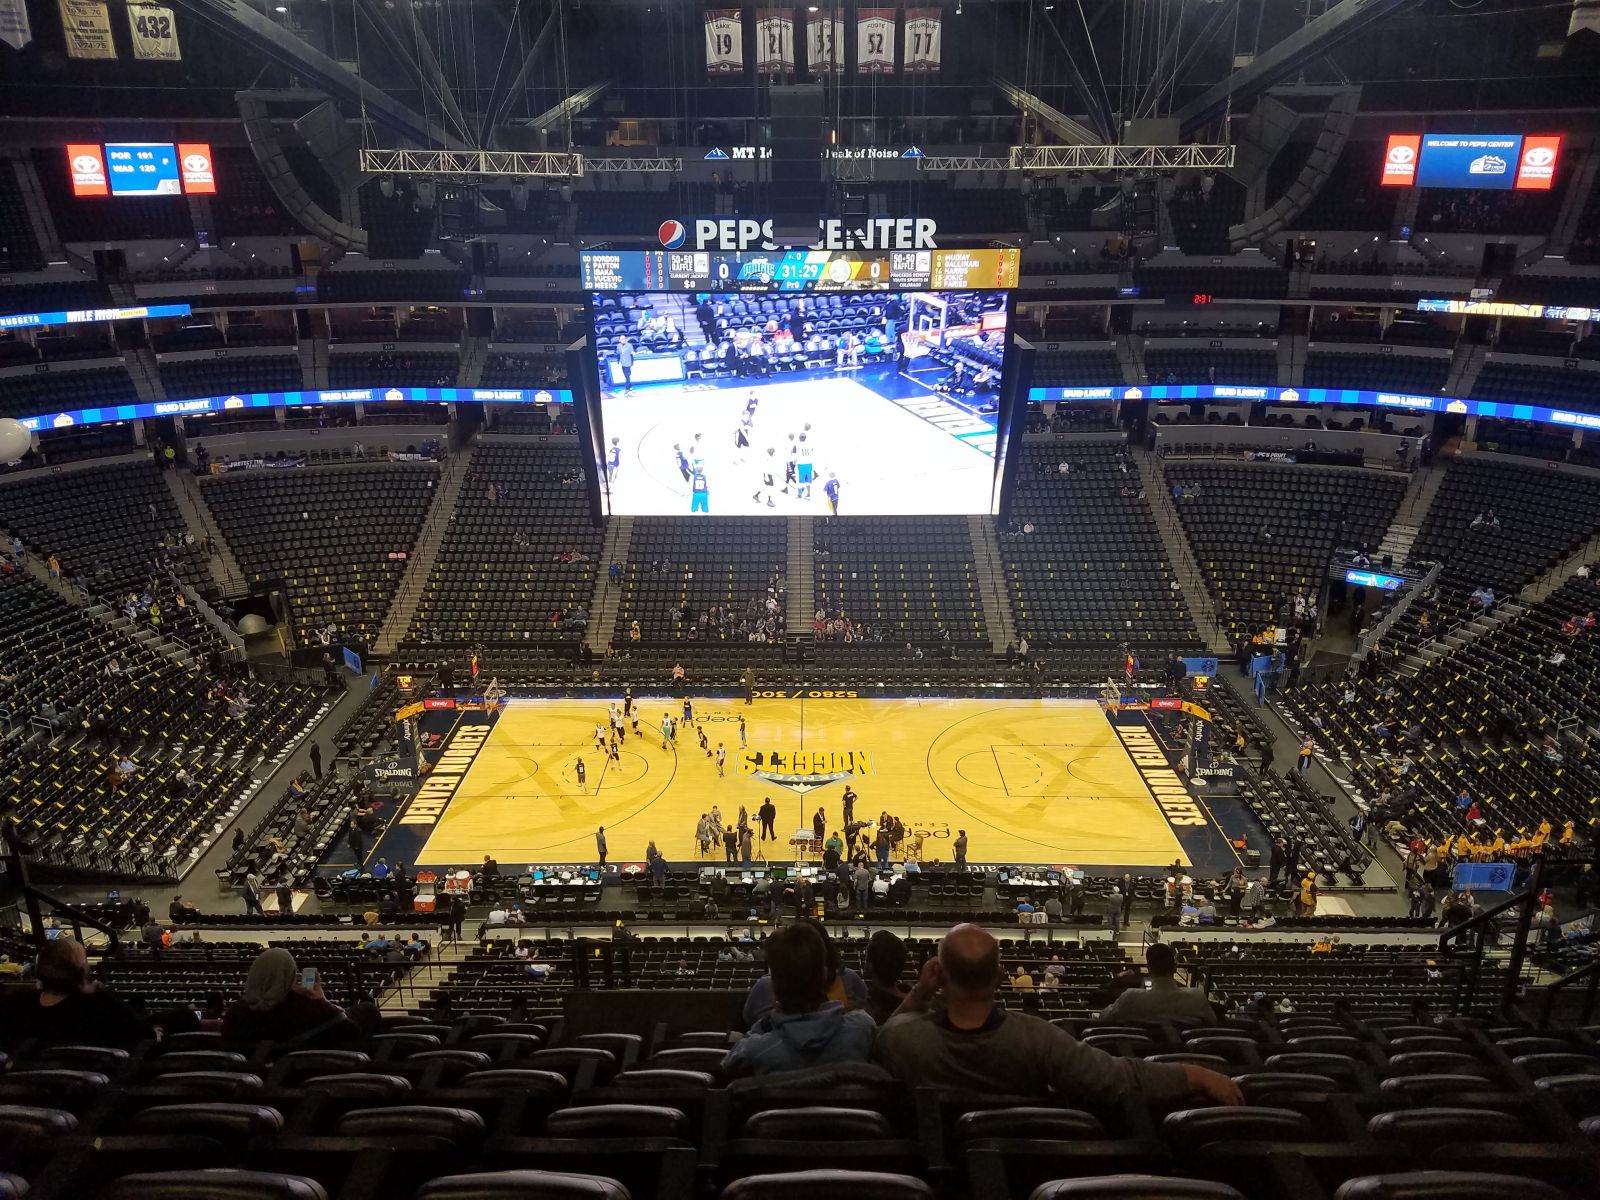 section 302, row 12 seat view  for basketball - ball arena